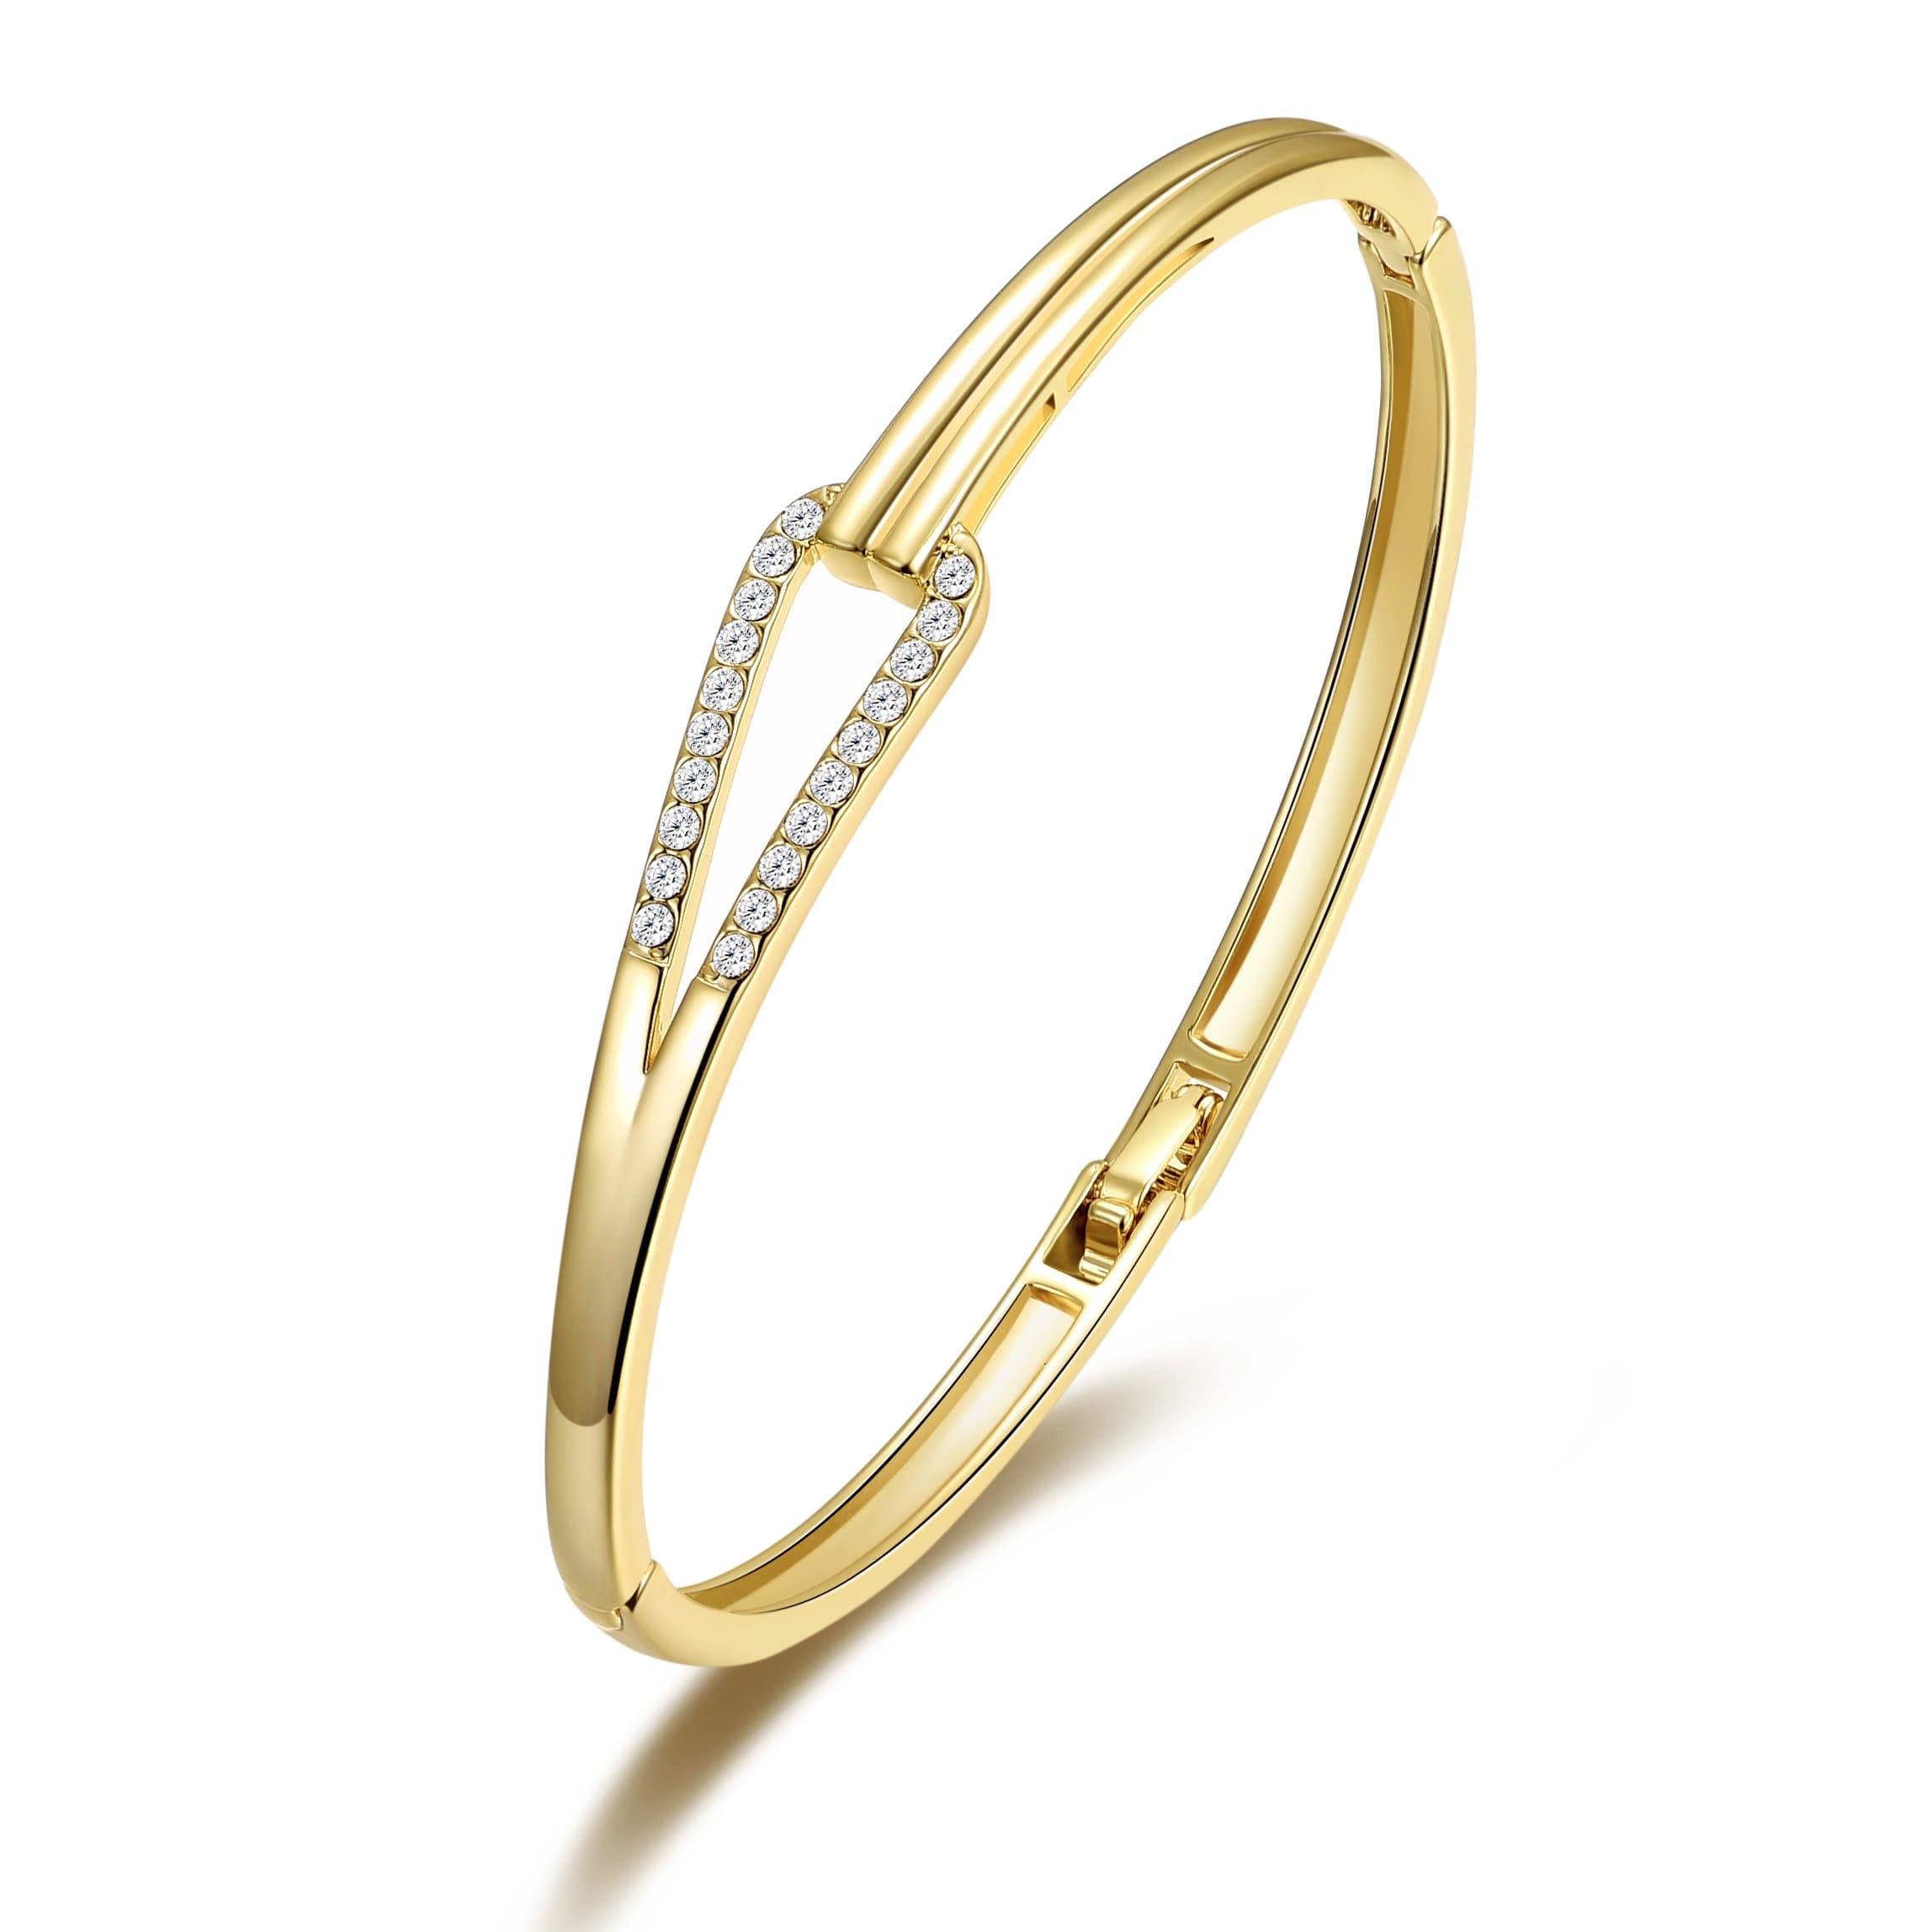 Gold Plated Link Bangle Created with Zircondia® Crystals by Philip Jones Jewellery